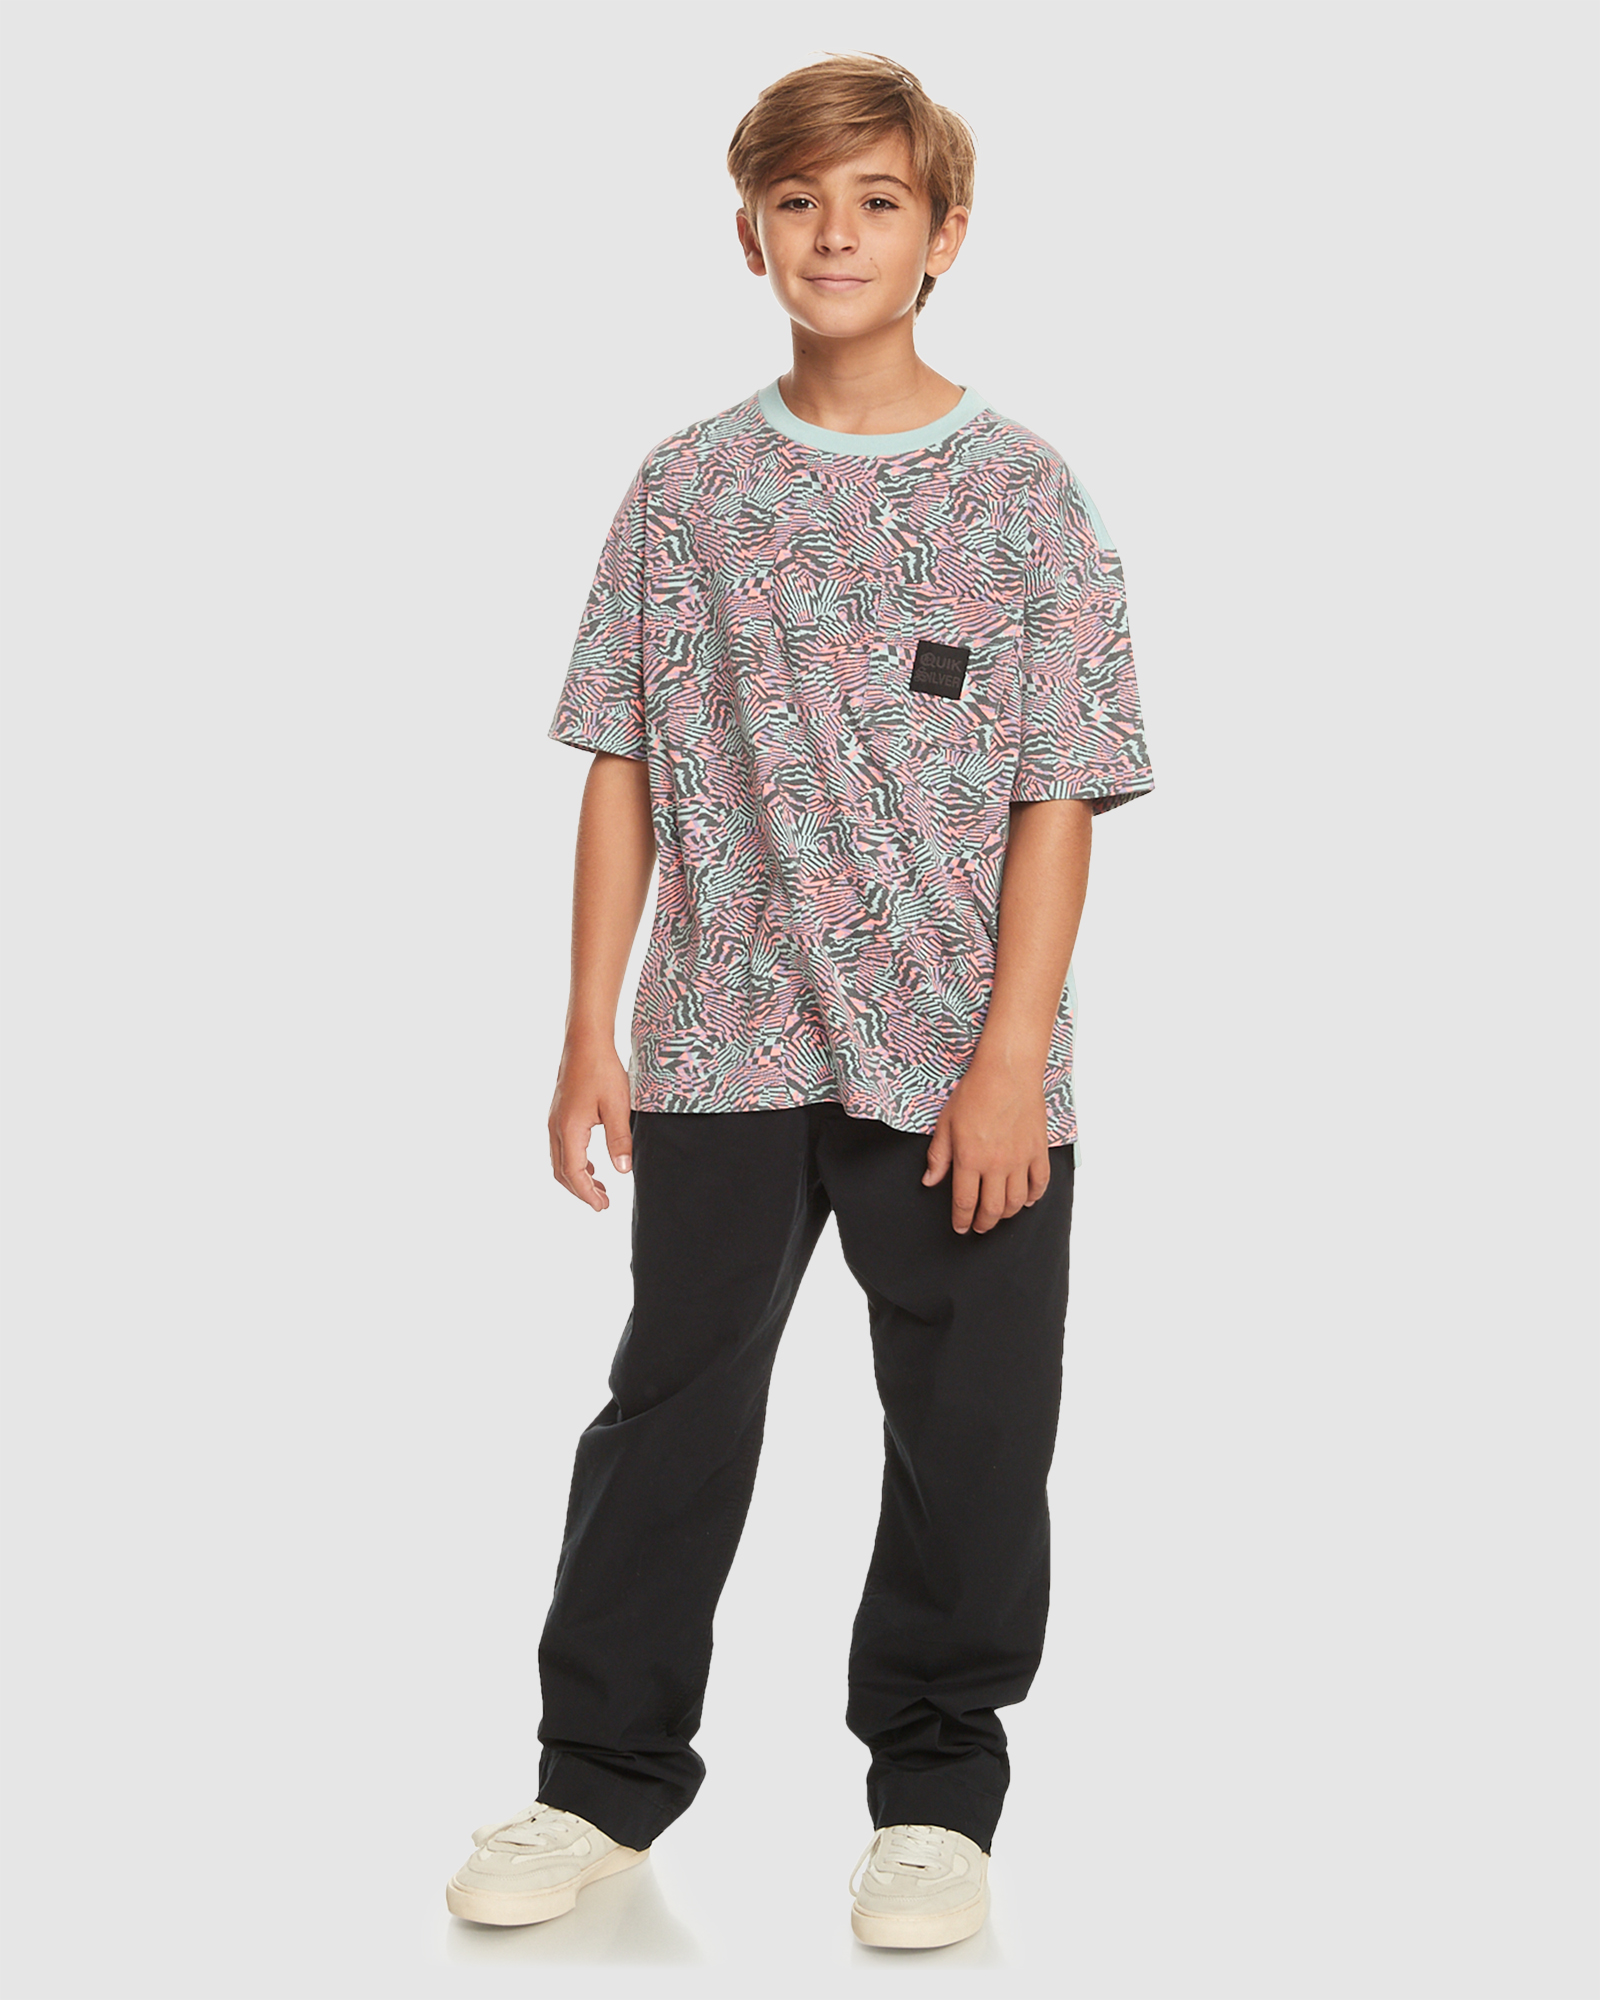 Quiksilver Boys 8-16 Radical All-Over Tee - Purple Rose | SurfStitch